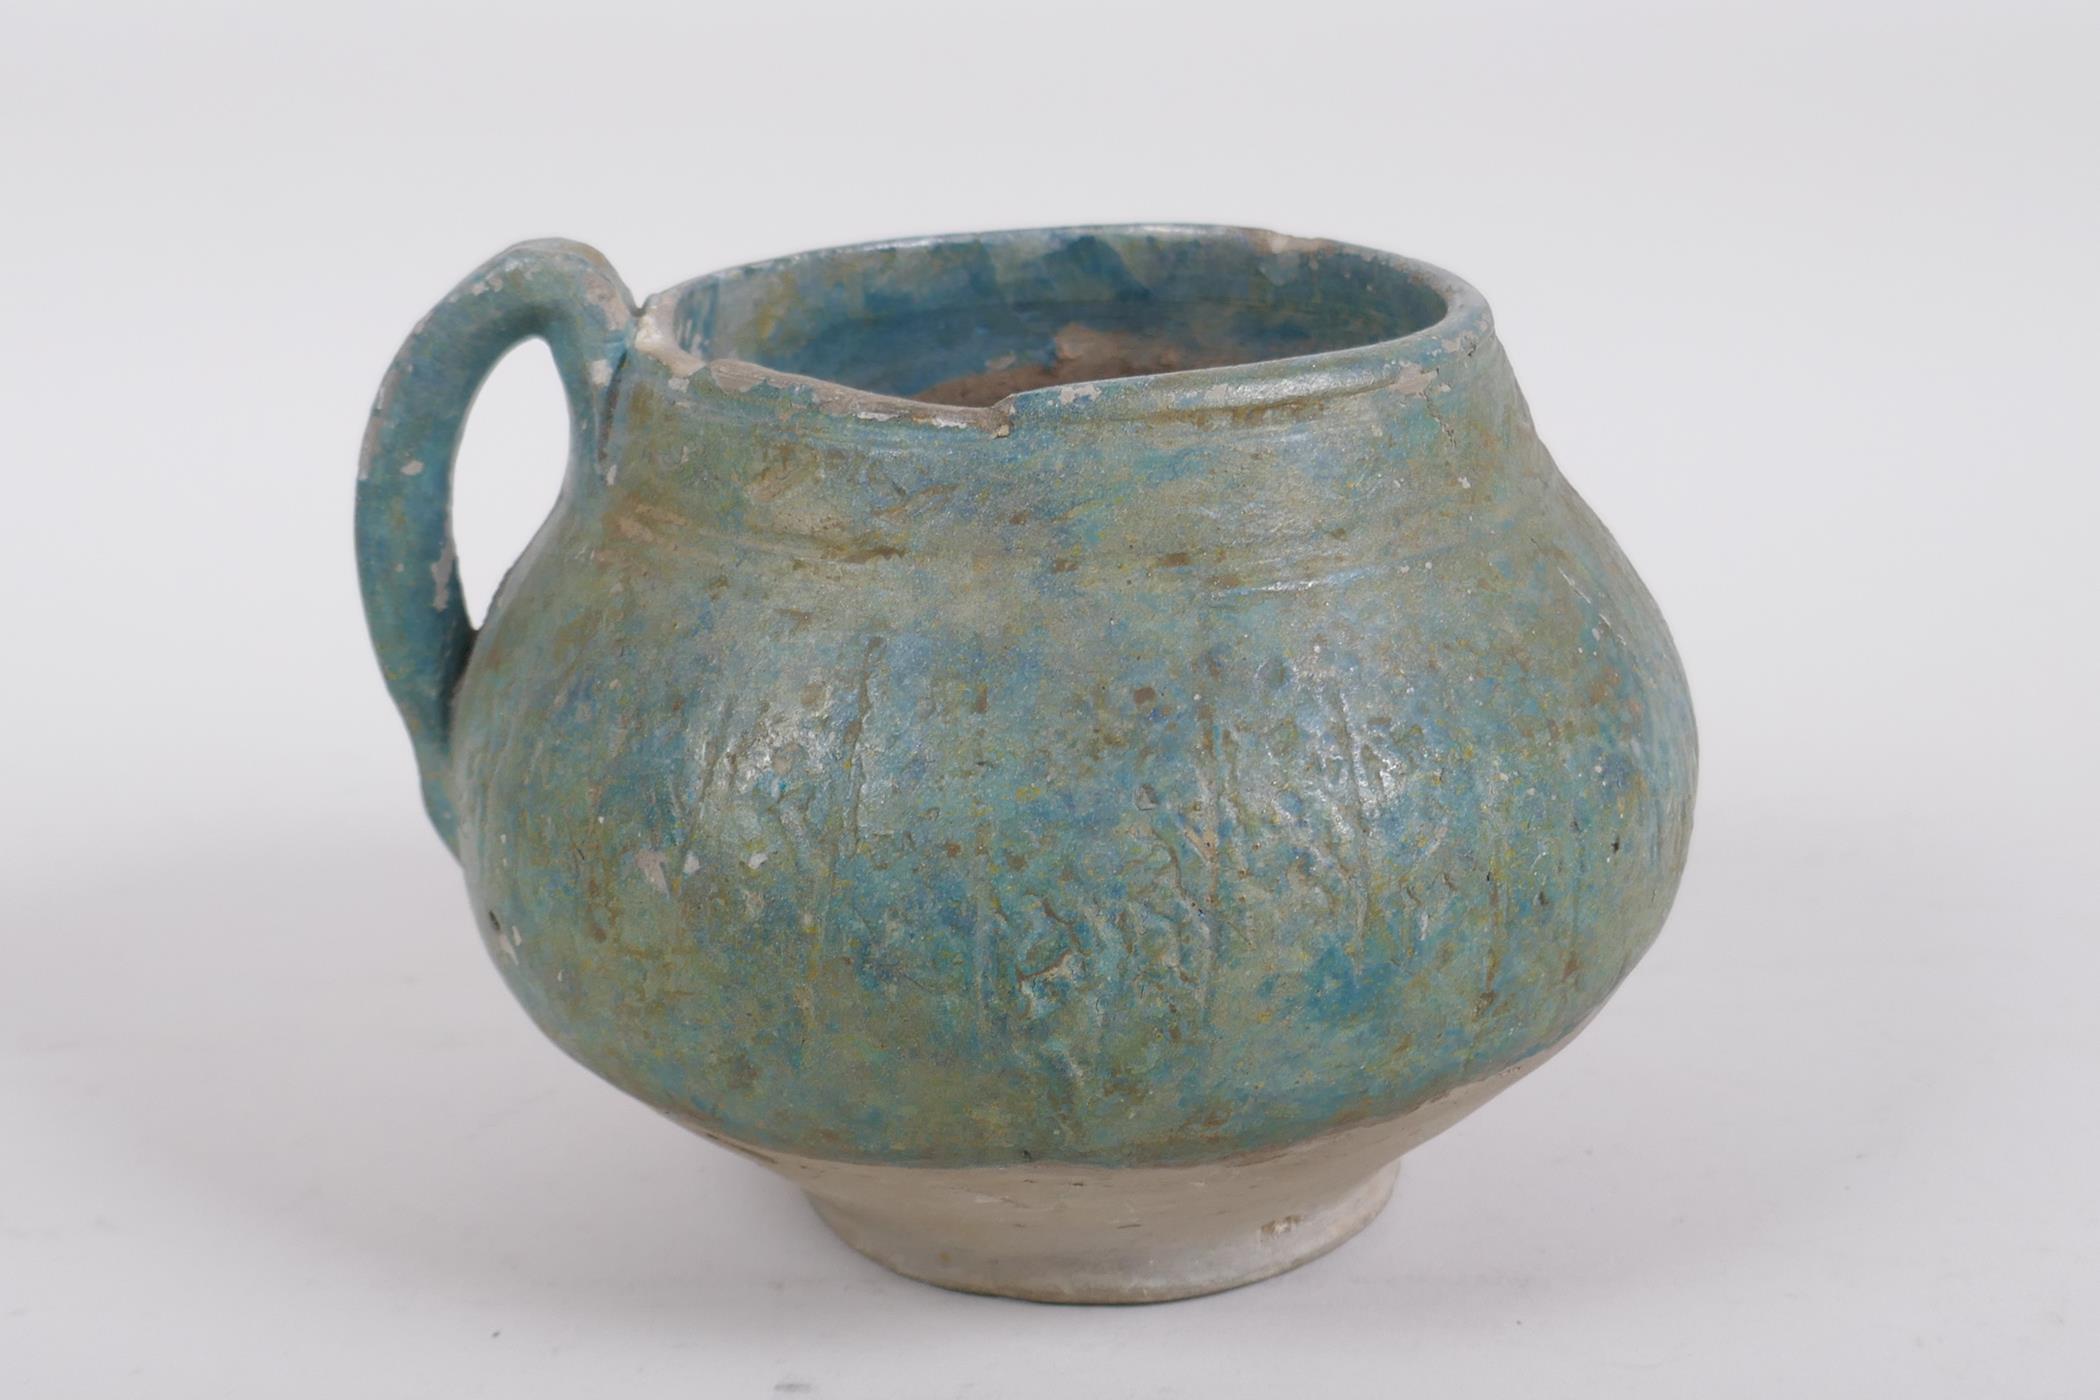 An antique turquoise slip glazed terracotta pot with a single handle, historic repairs, 14cm